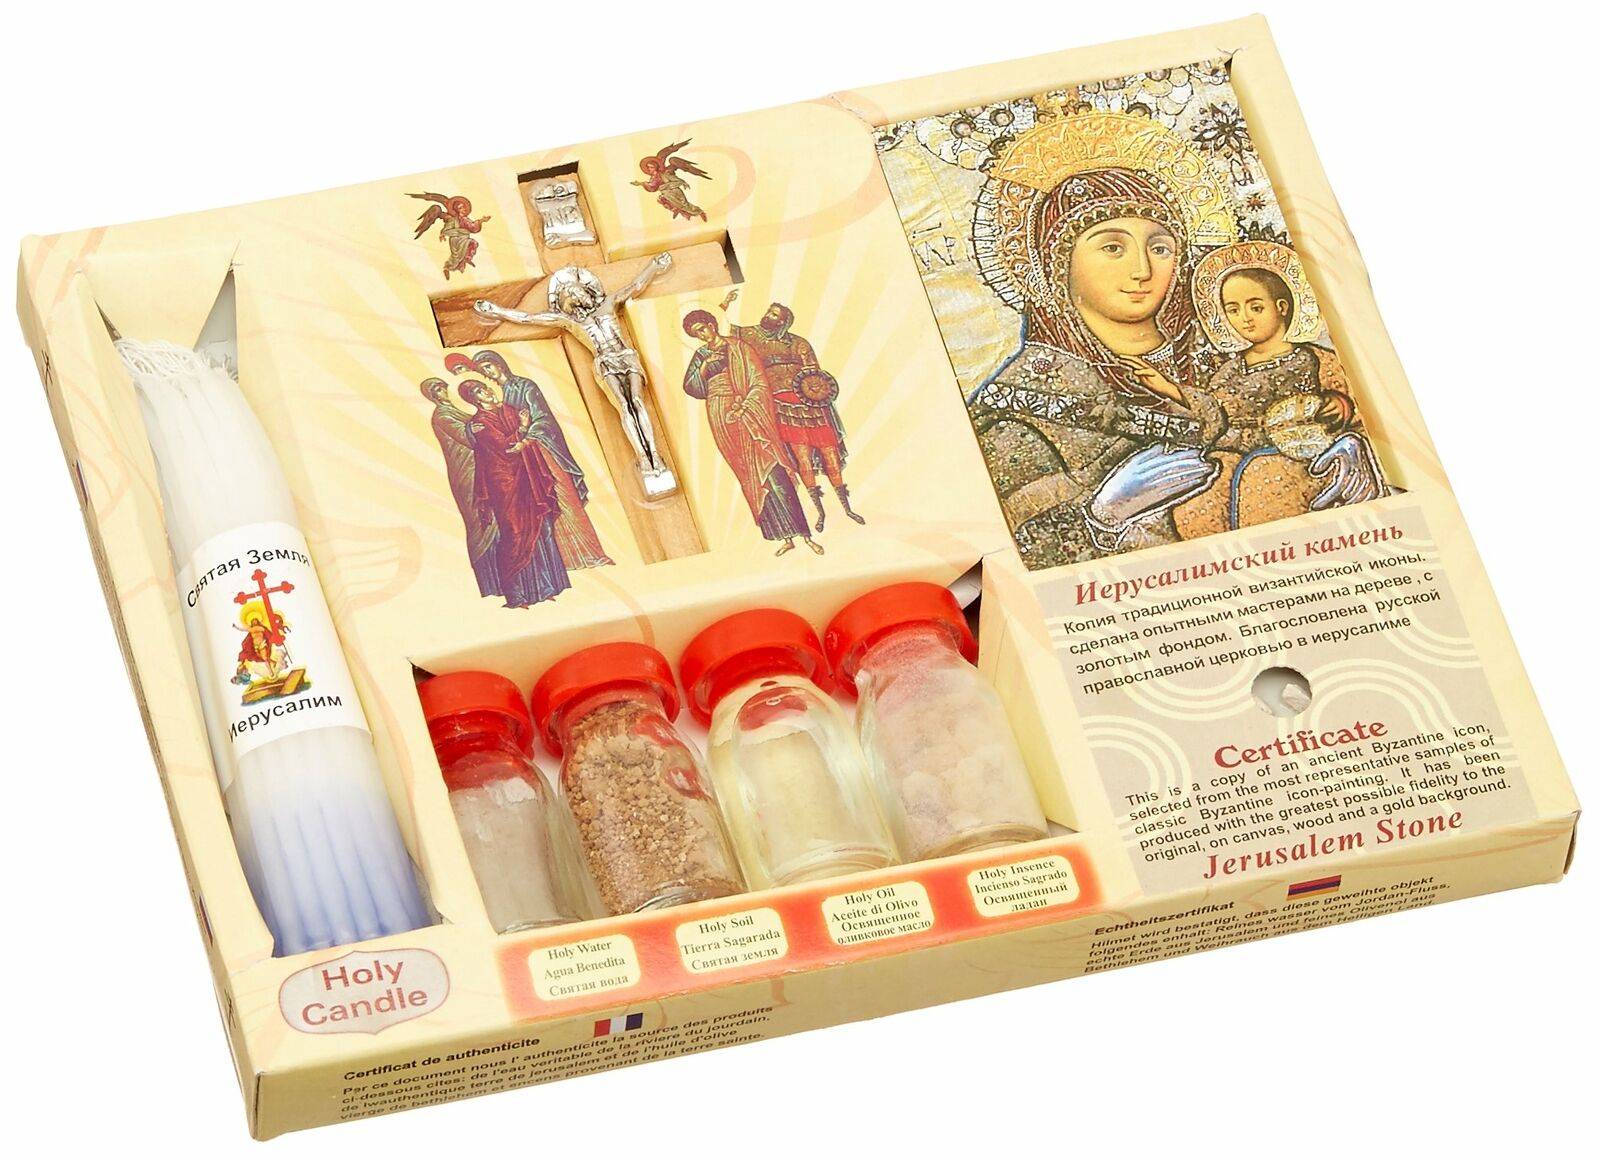 7 in 1 Holy Land Mega Set Holy Water Soil Oil Incense, Crucifix Cross, Candles